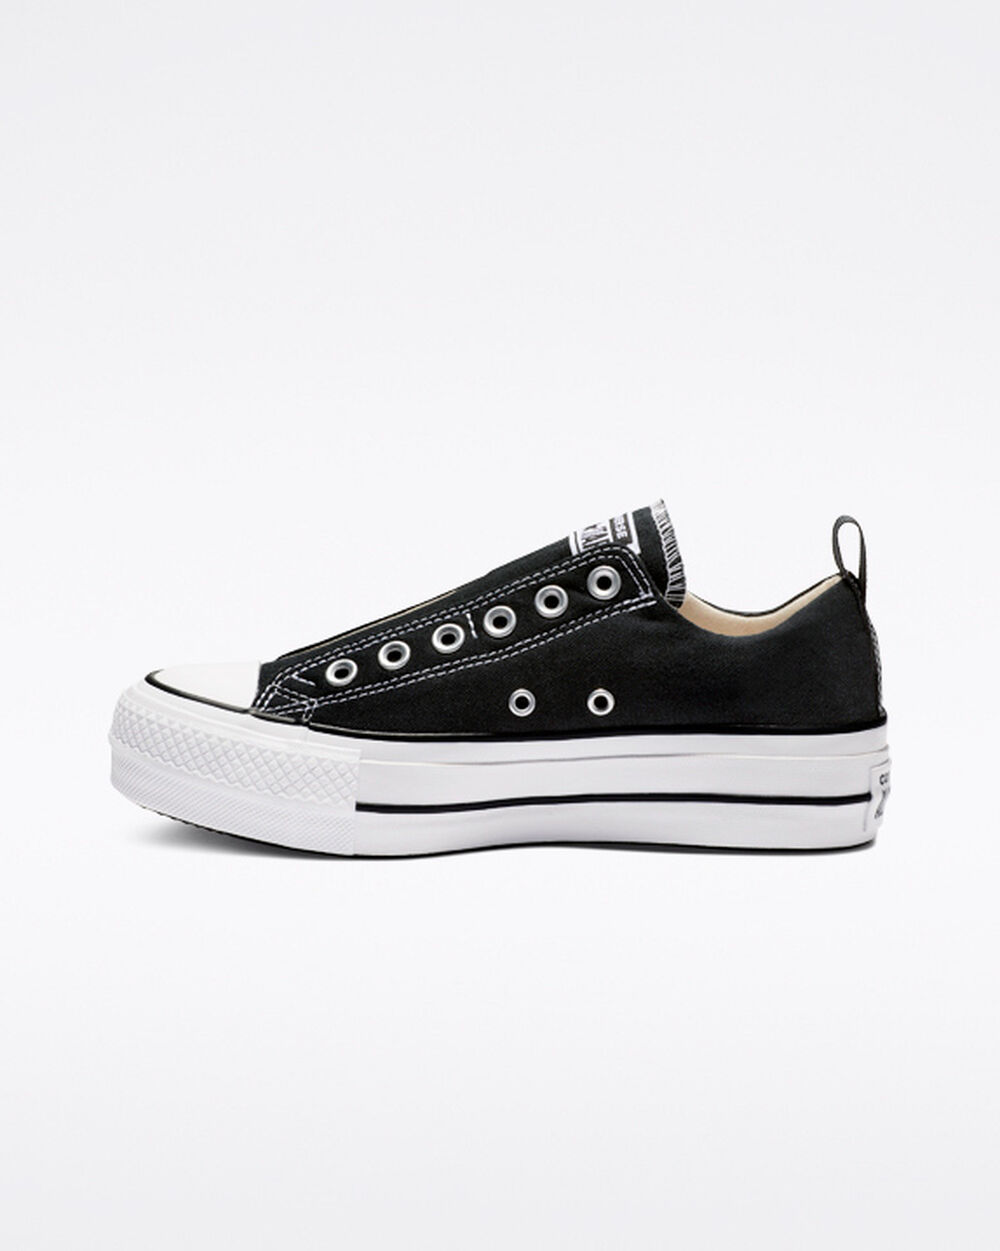 Tenis Converse Chuck Taylor All Star Mujer Negros Blancos Negros | Mexico-571026